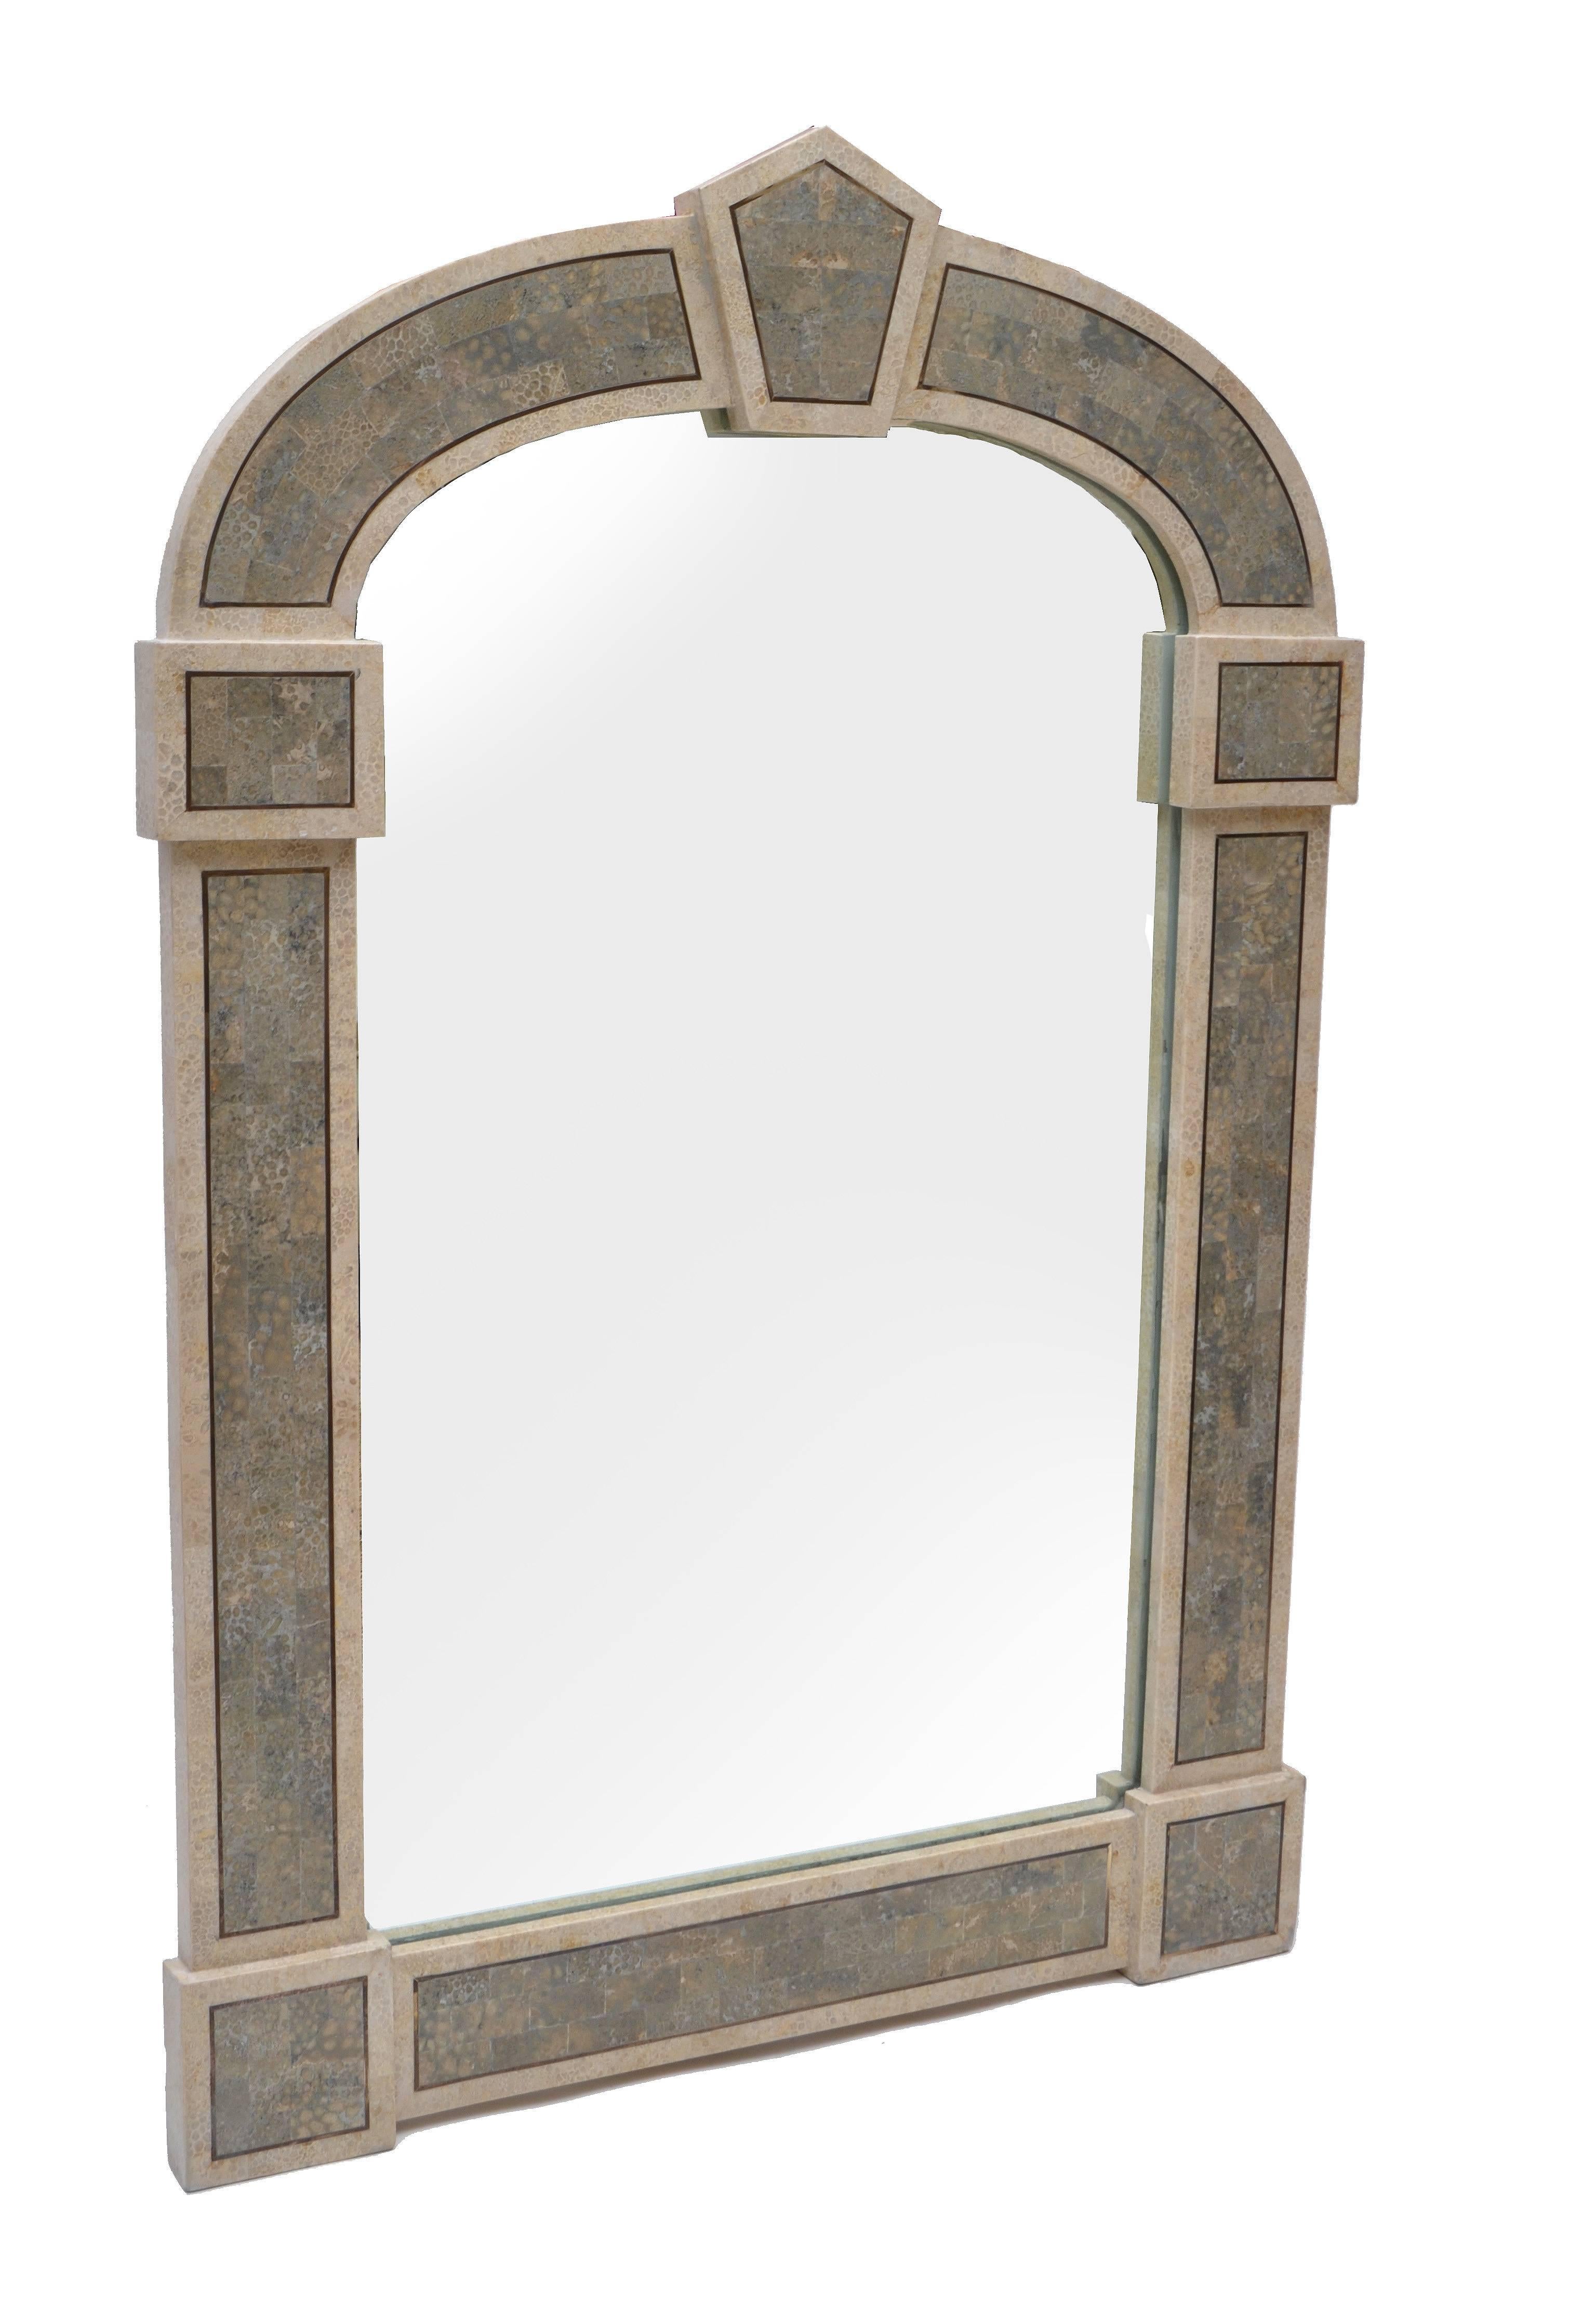 Tessellated stone over wood Gothic shaped wall mirror.
Easy and secure to be hung, has hooks on the reverse.
 